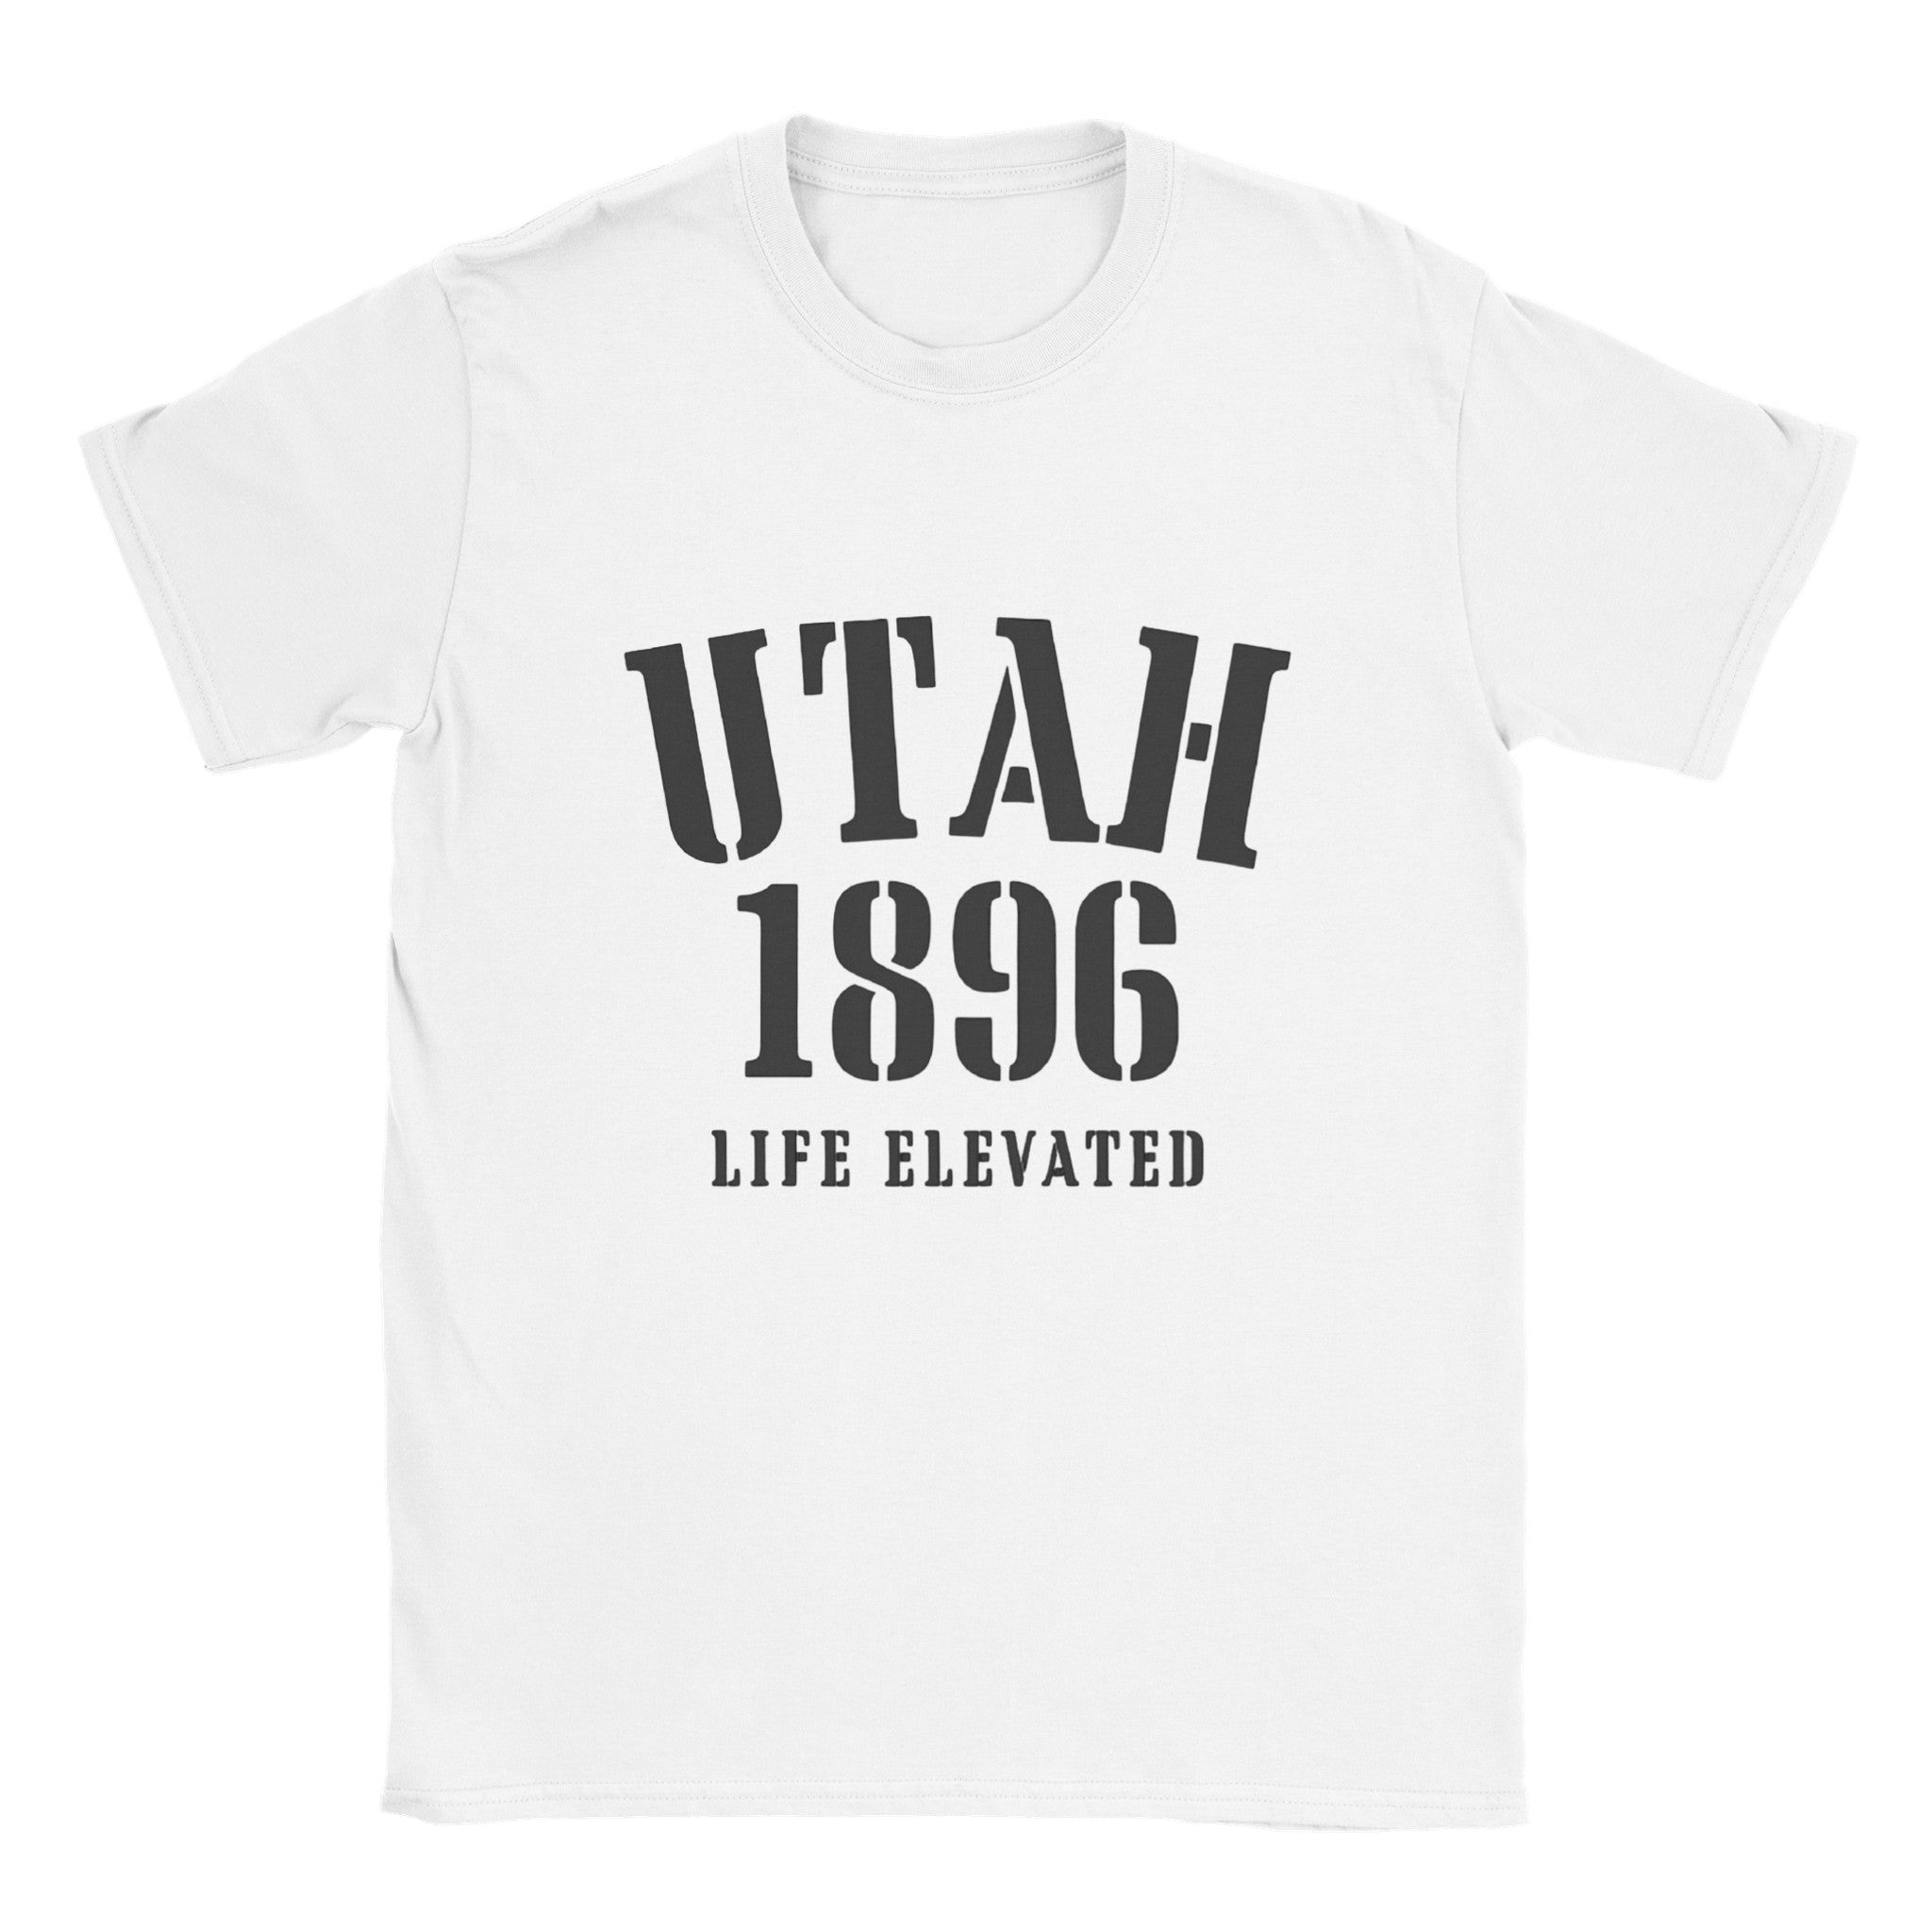 Utah- Classic Unisex Crewneck States T-shirt - Creations by Chris and Carlos